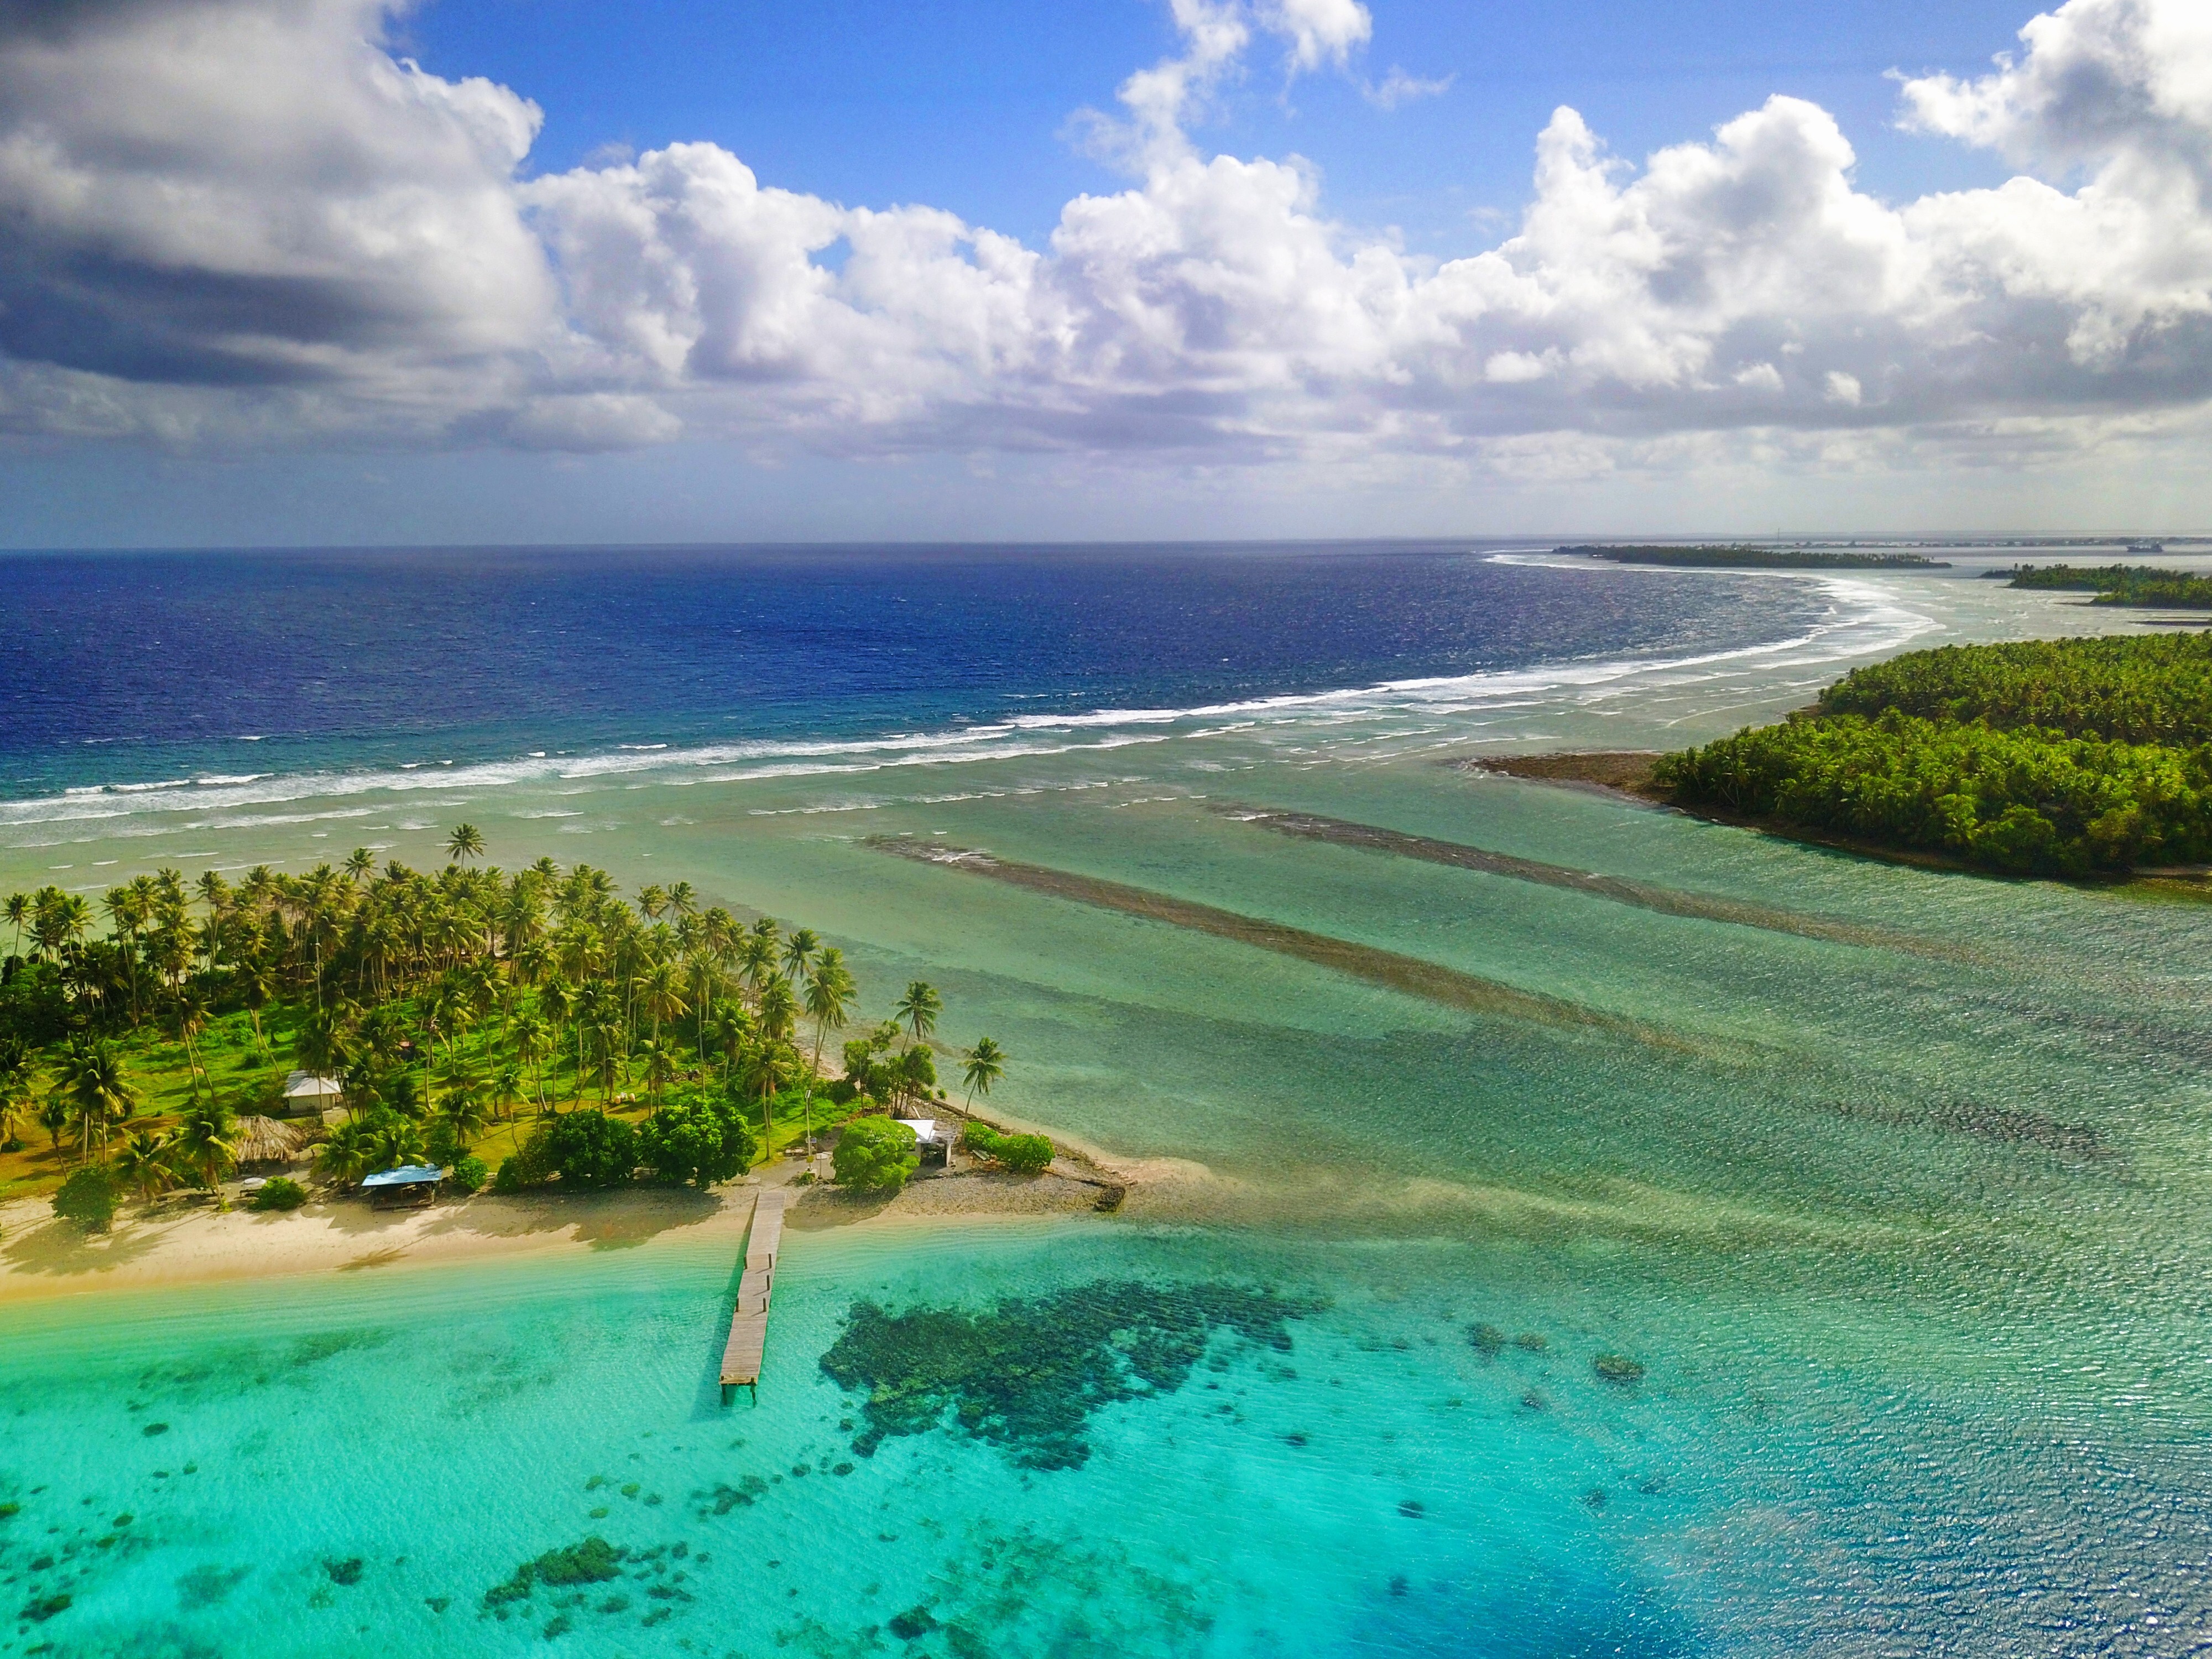 The Marshall Islands is made up of 1,200 islands scattered across a swathe of ocean the size of Mexico. Photo: Shutterstock